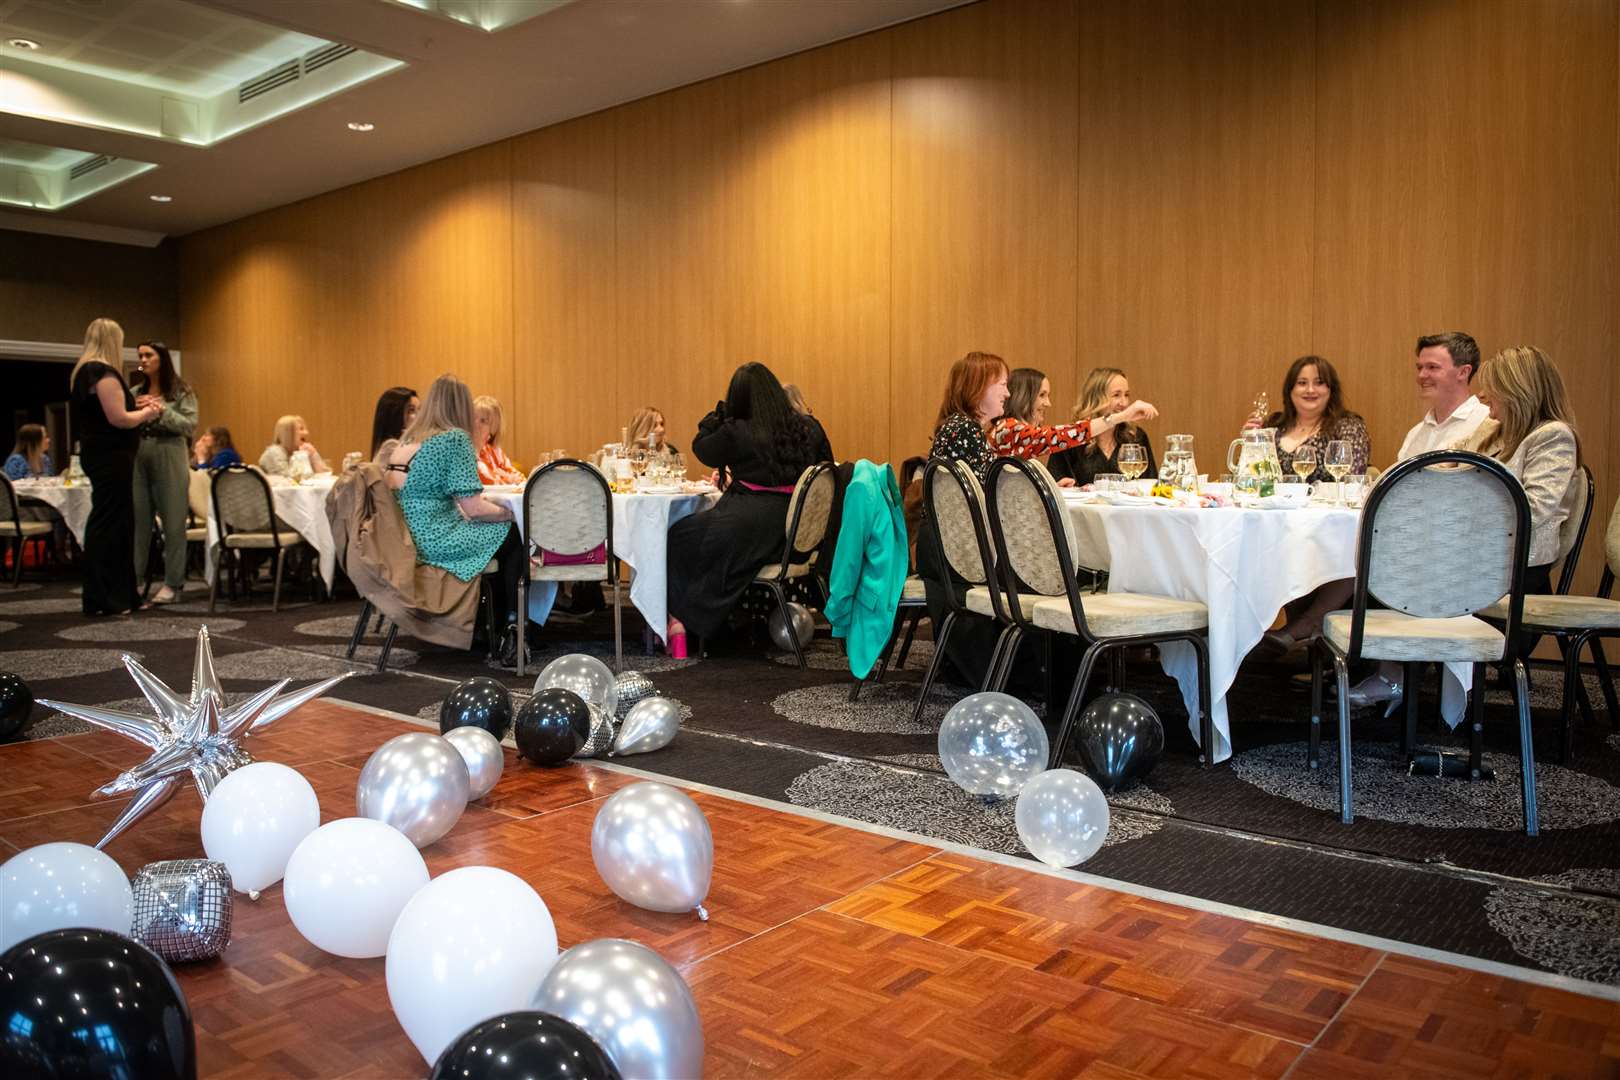 The event was held at the Kingsmills hotel in Inverness.